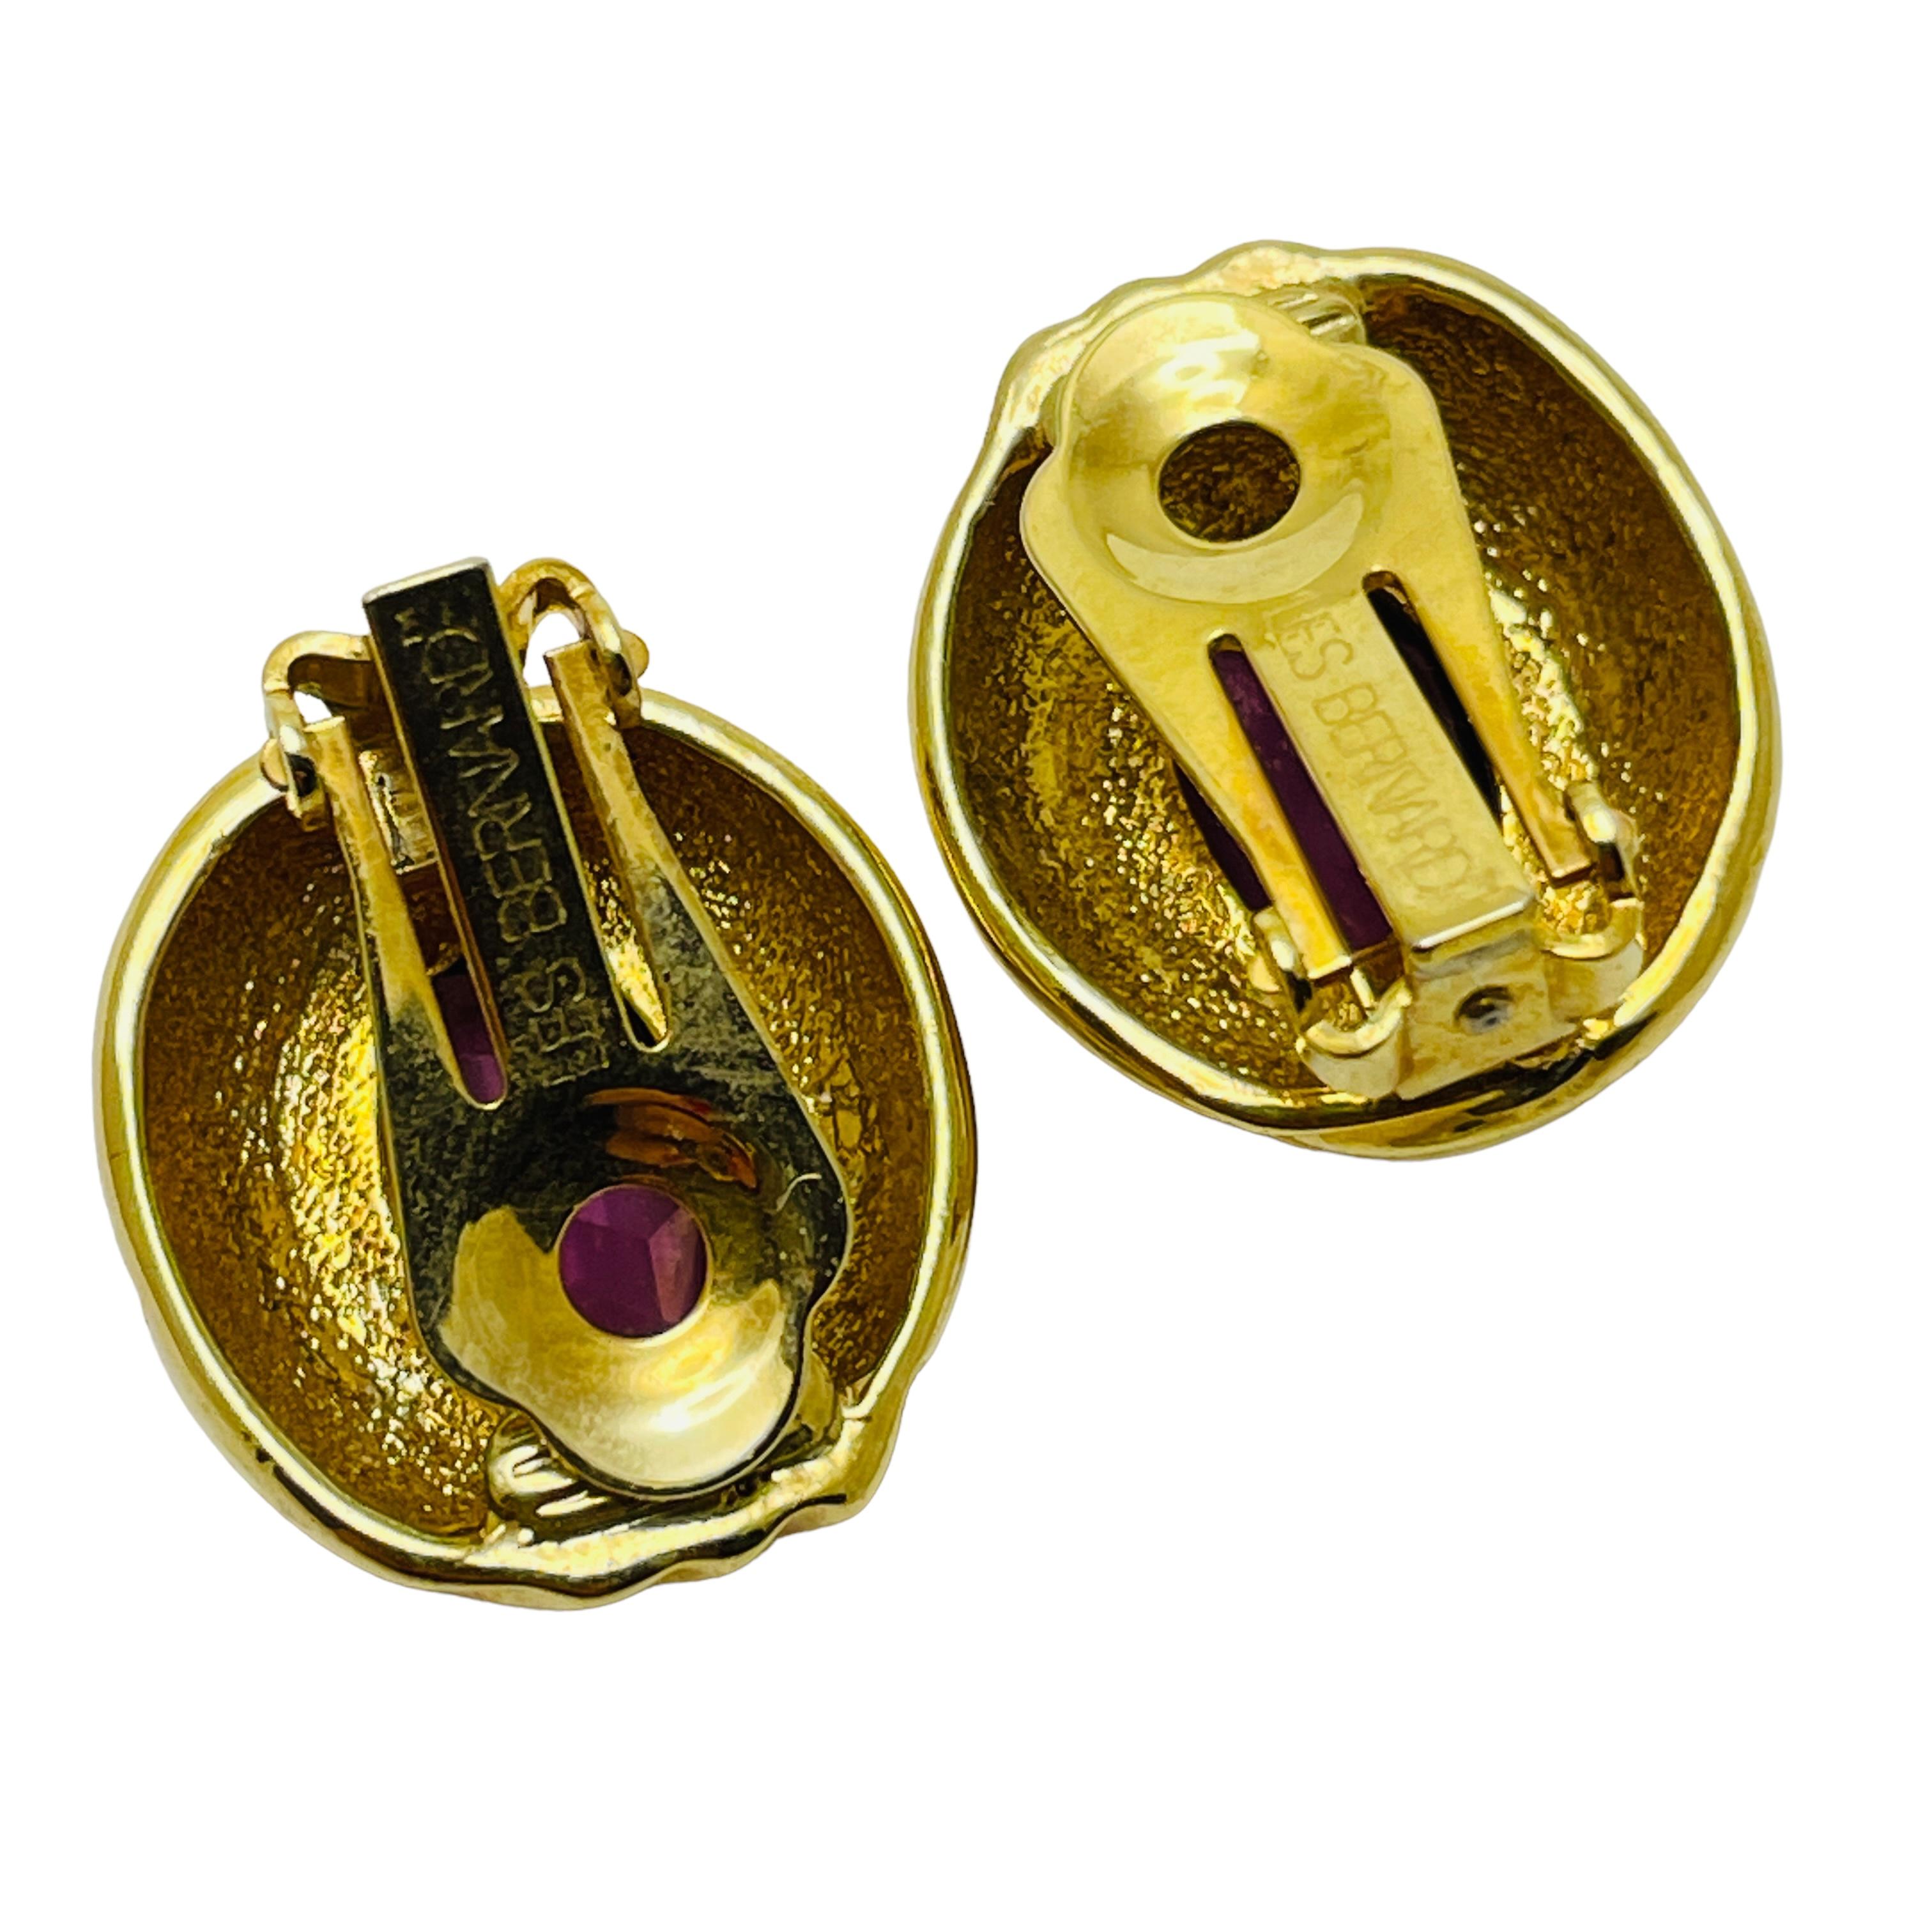 LES BERNARD vintage gold amethyst glass designer runway clip on earrings In Good Condition For Sale In Palos Hills, IL